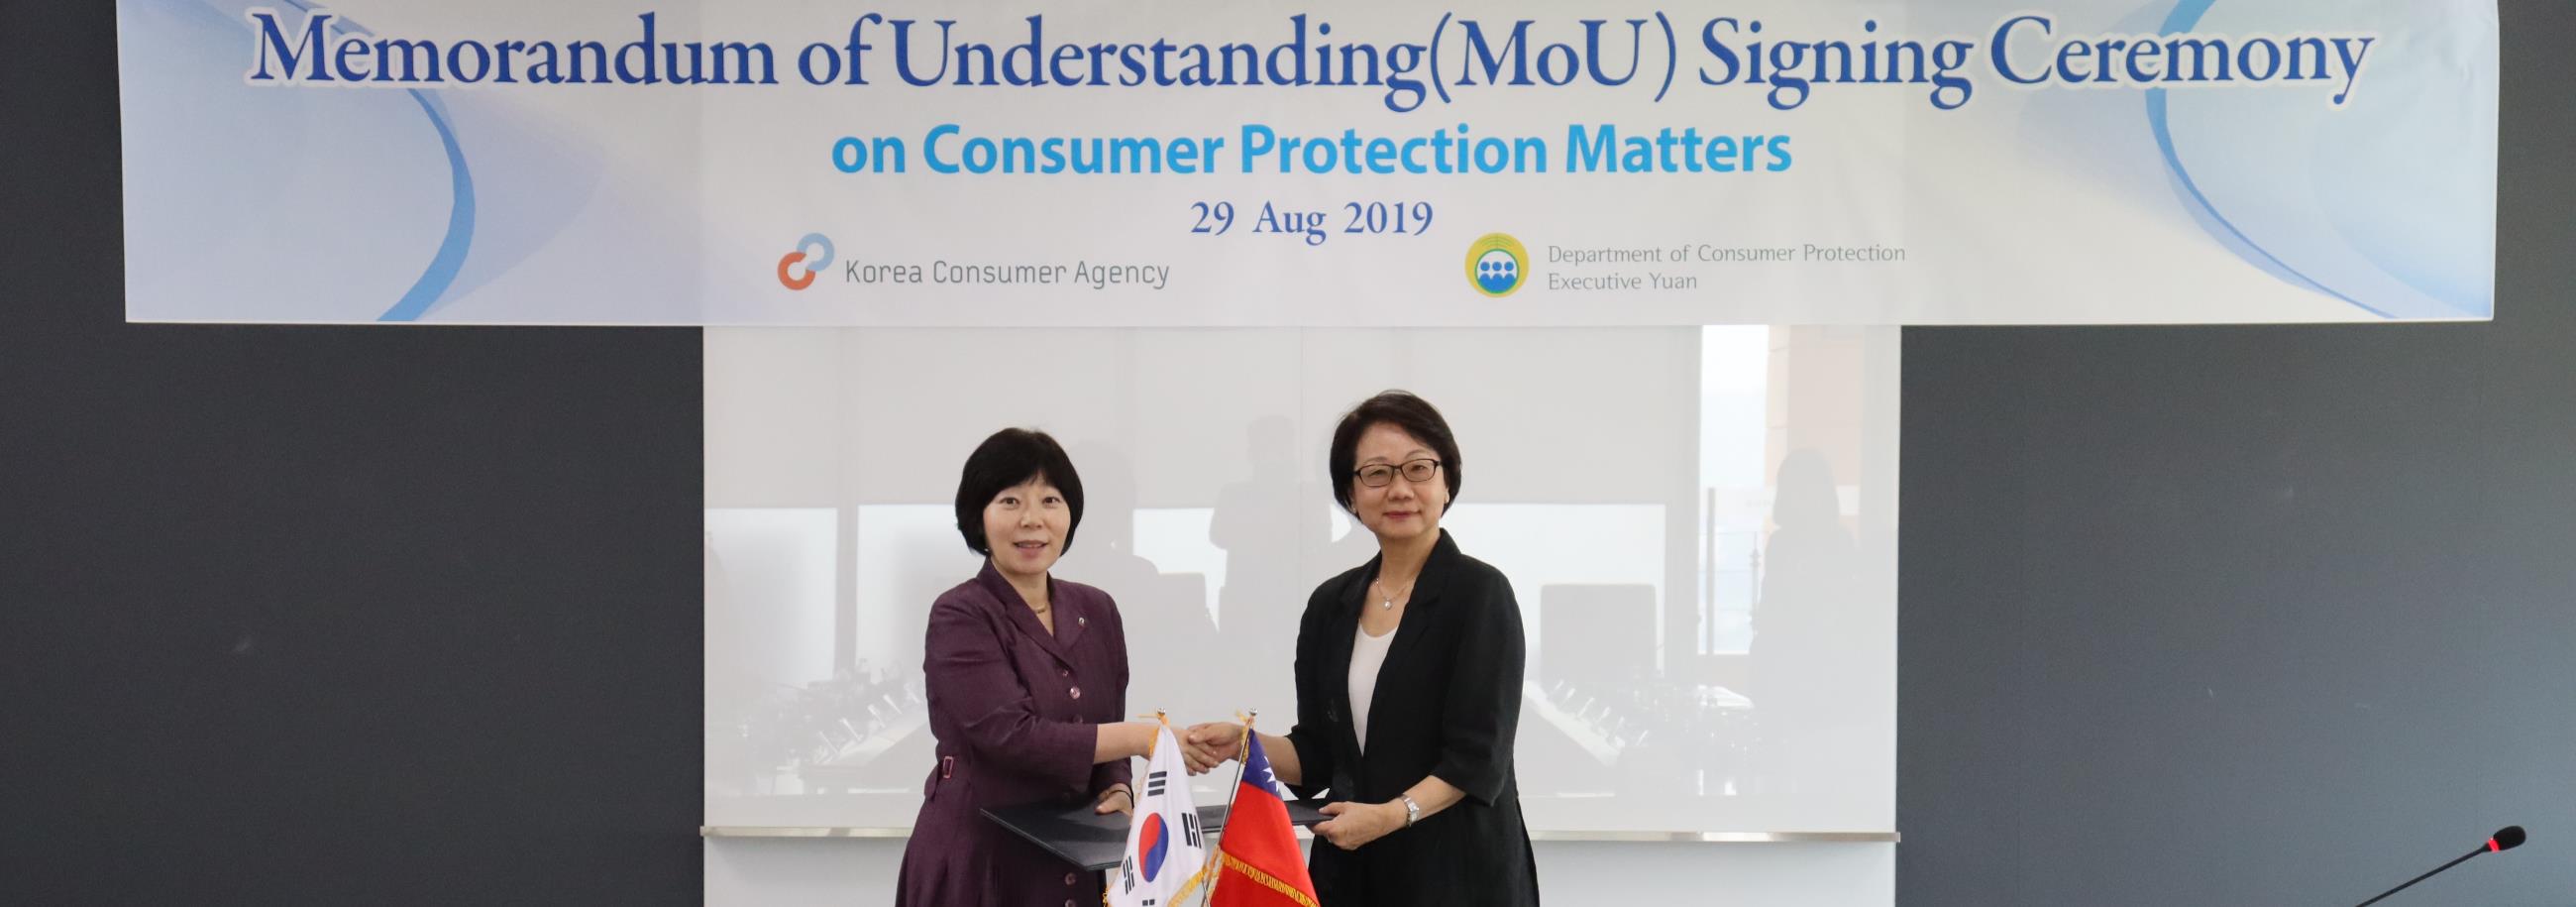 Taiwan and South Korea Signed Memorandum of Understanding on Consumer Protection